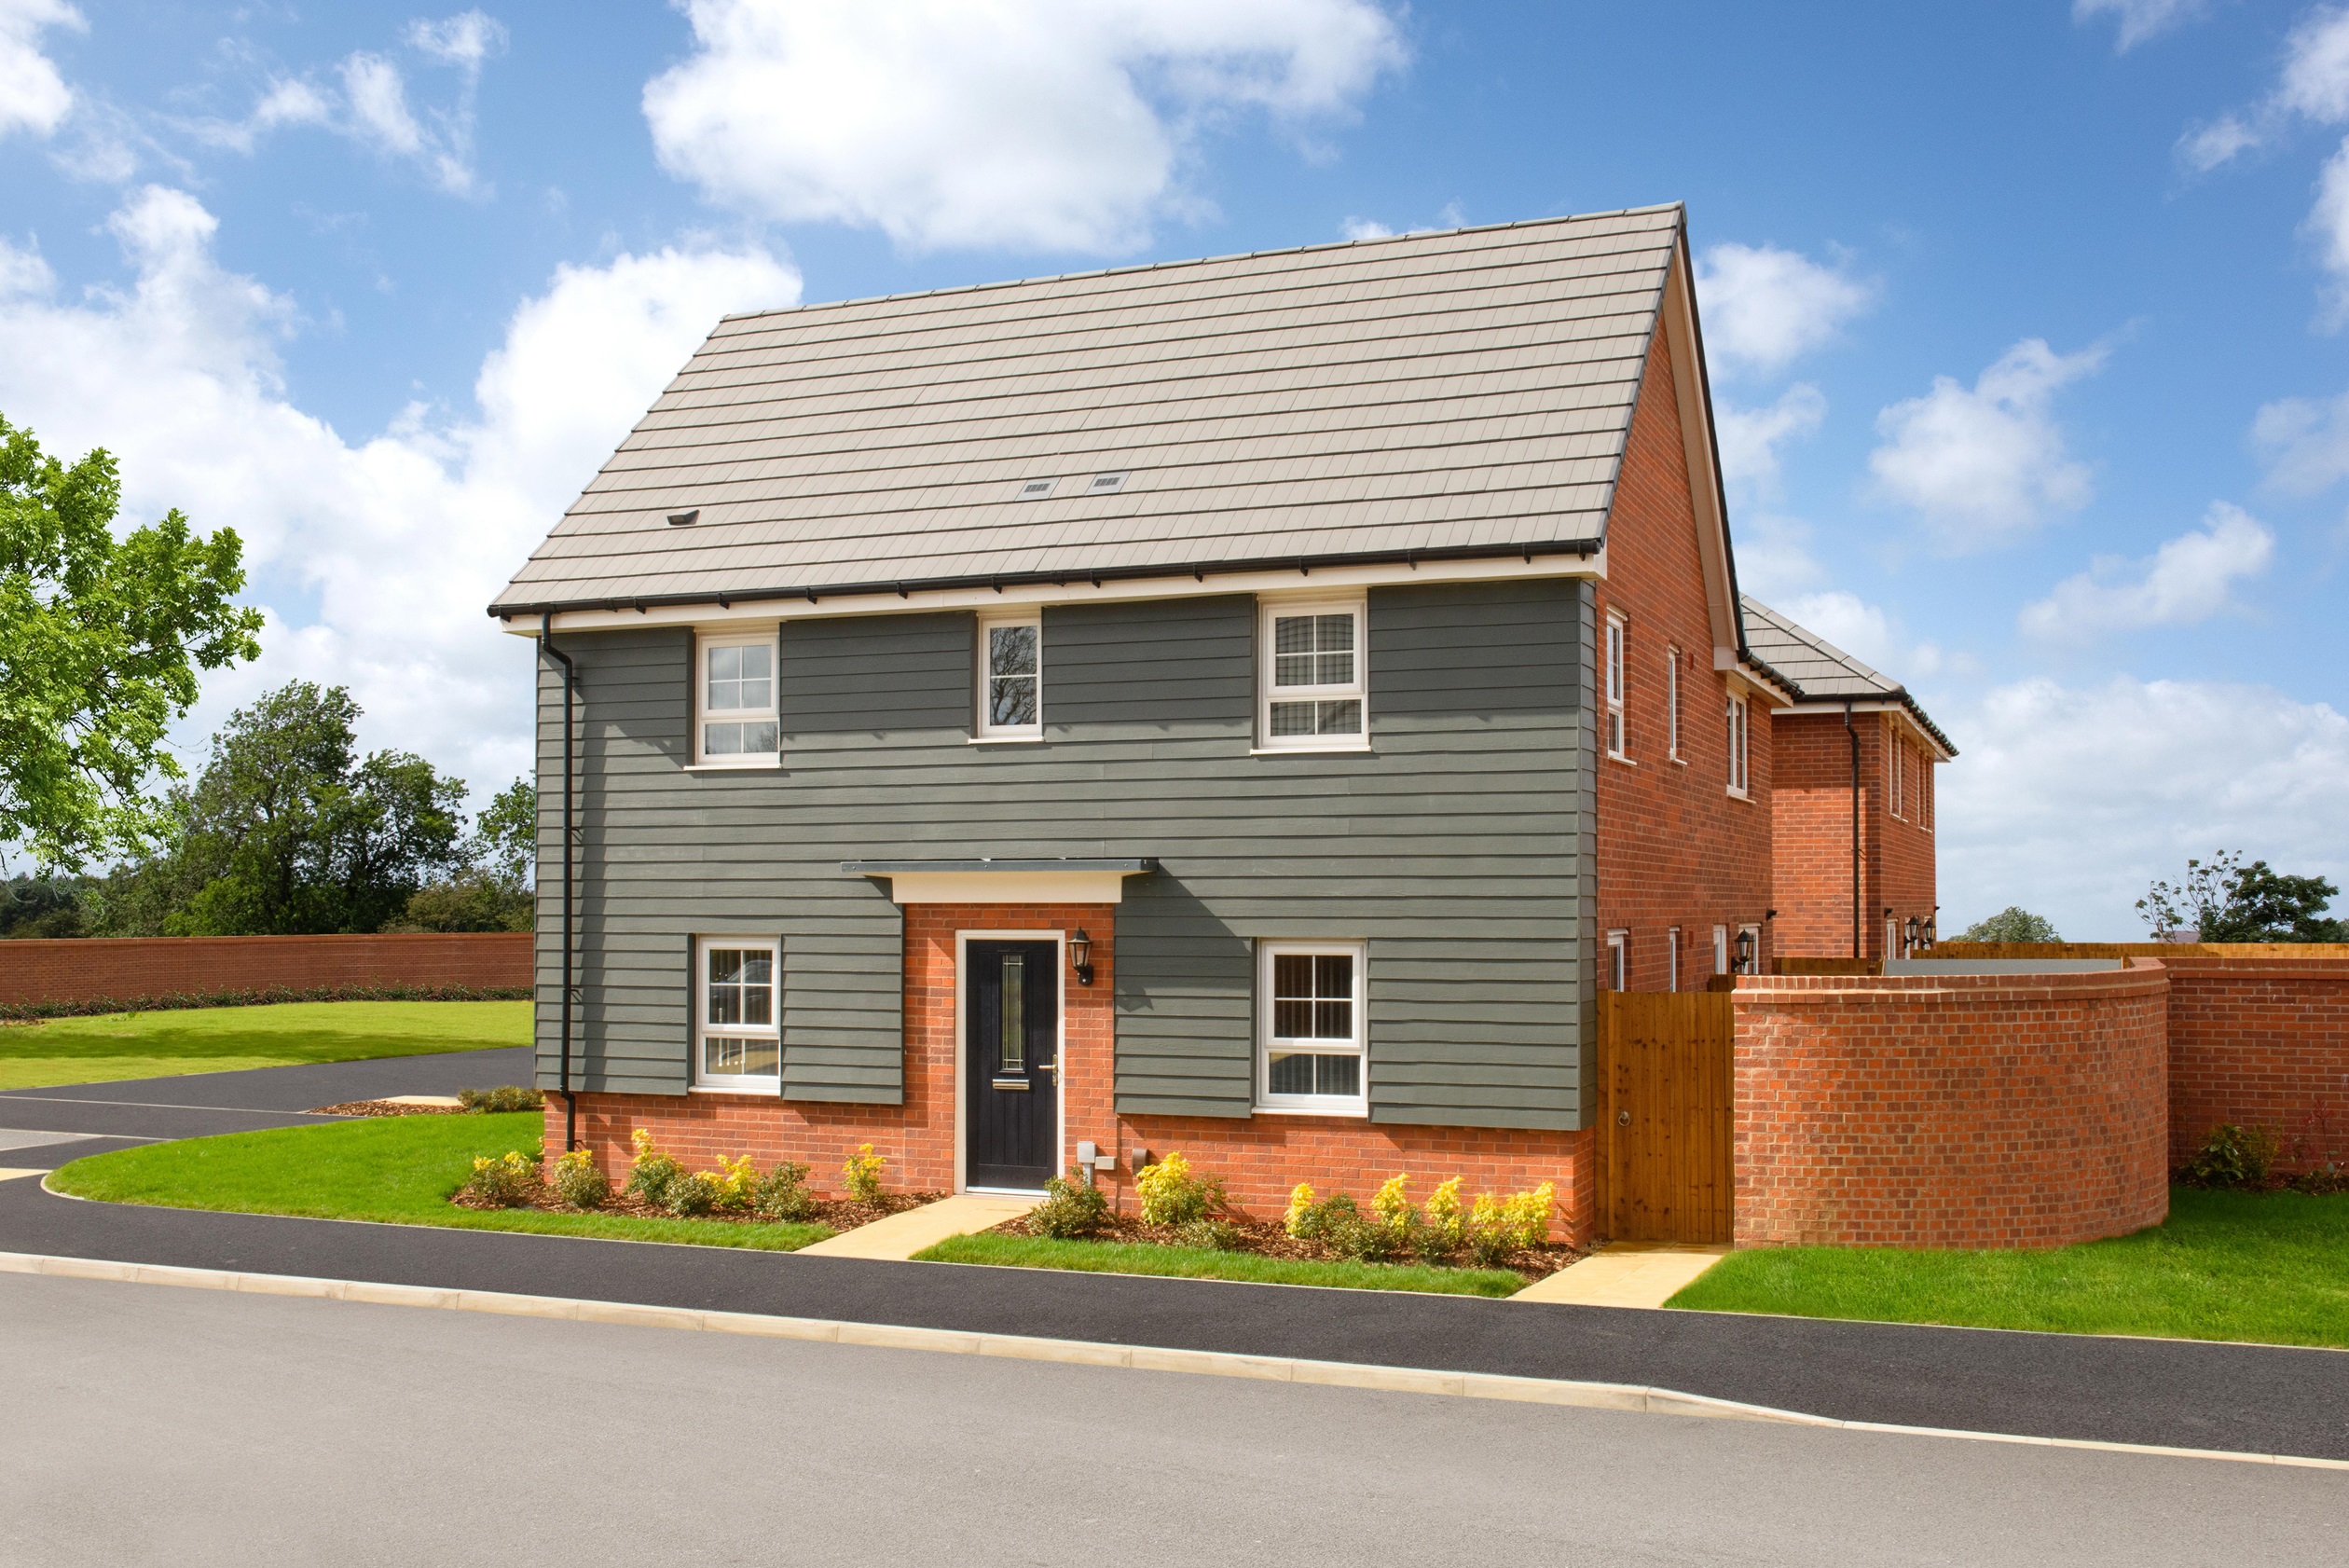 Property 1 of 9. Exterior Image Of Our 3 Bed Moresby Home At Elborough Place, Rugby